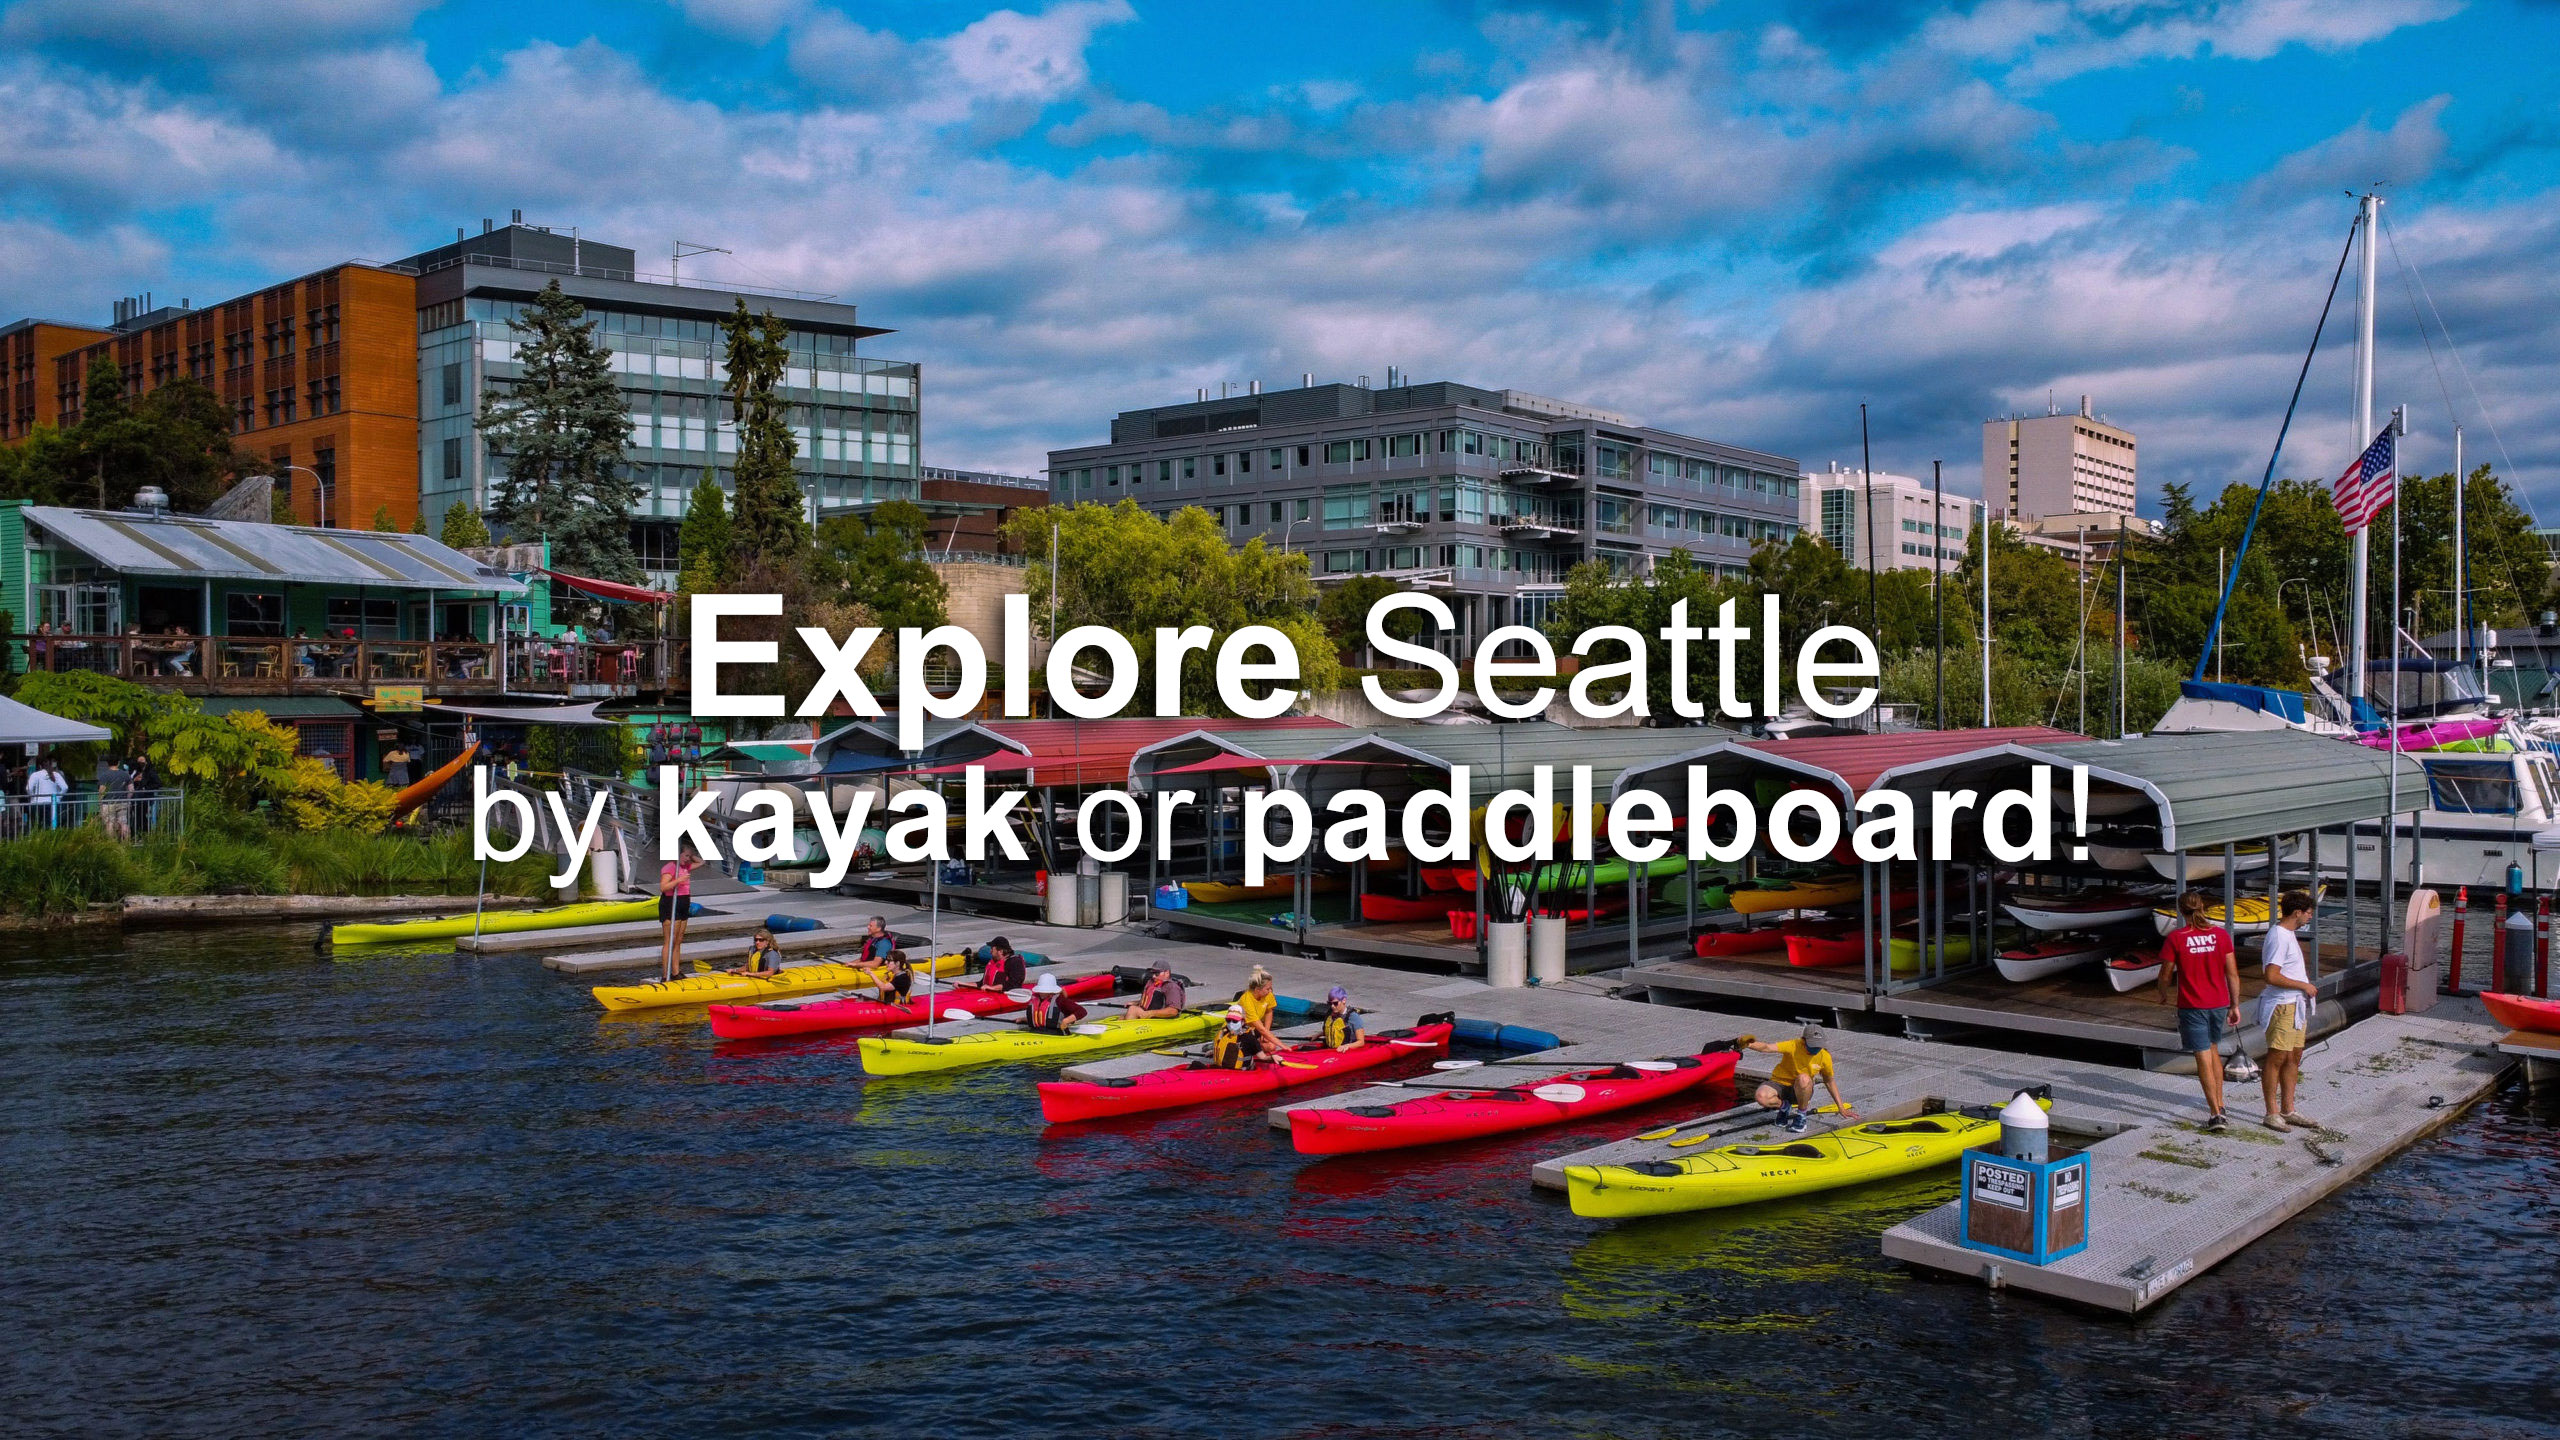 Explore Seattle By Kayak or Paddleboard